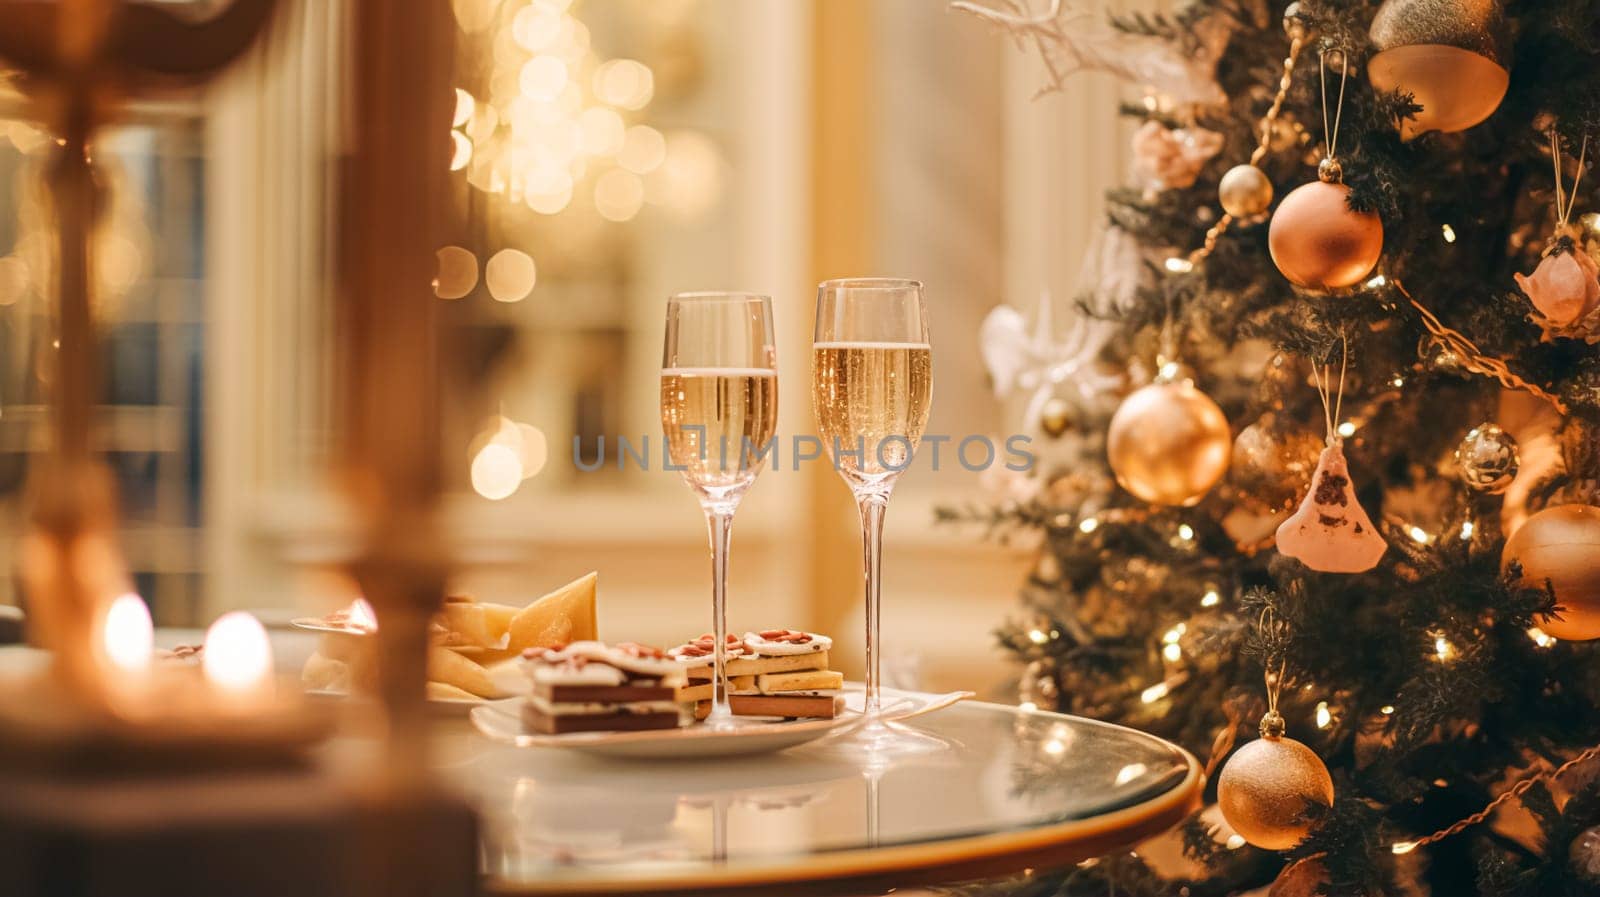 Christmas holidays and New Year celebration, dinner table at a luxury English styled restaurant or hotel, wine, appetisers and Christmas tree decoration, holiday party and event invitation idea